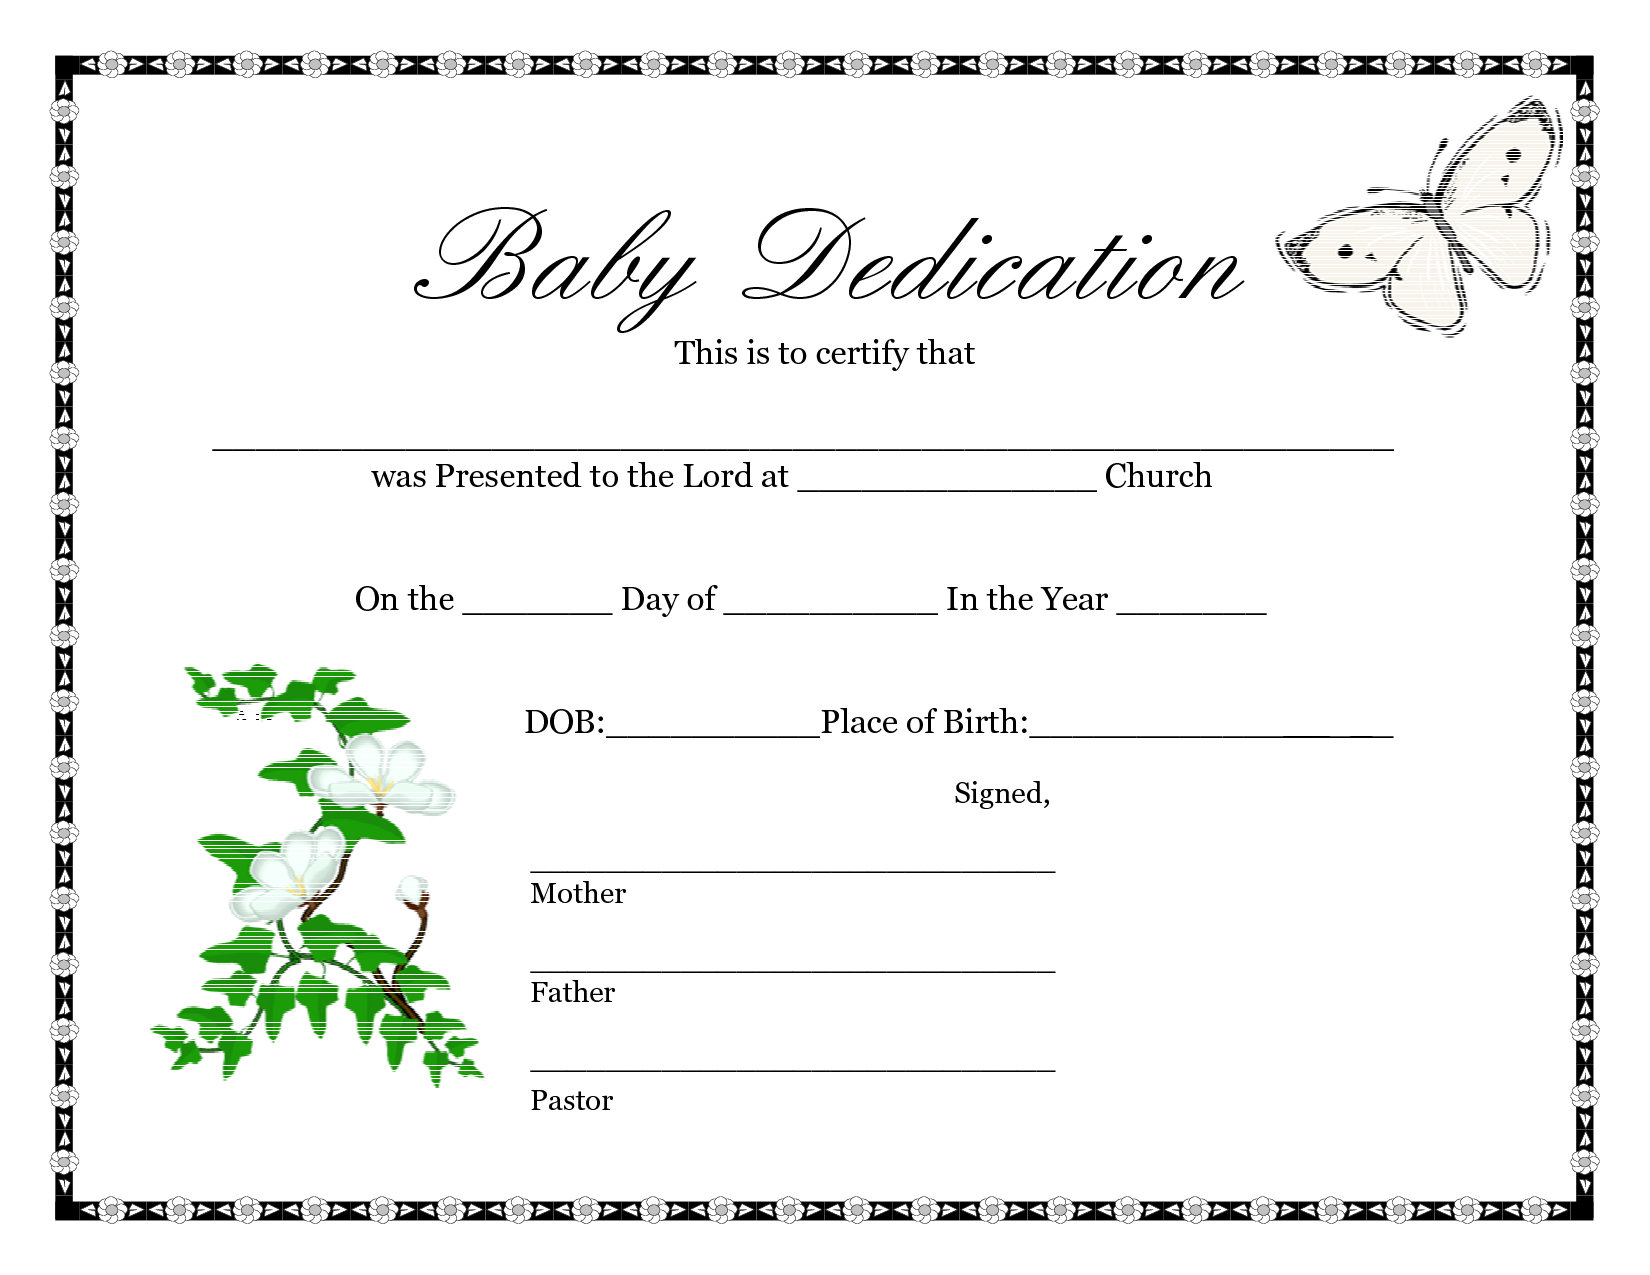 Downloadable Blank Birth Certificate Template Sample : V M D Pertaining To Blank Adoption Certificate Template